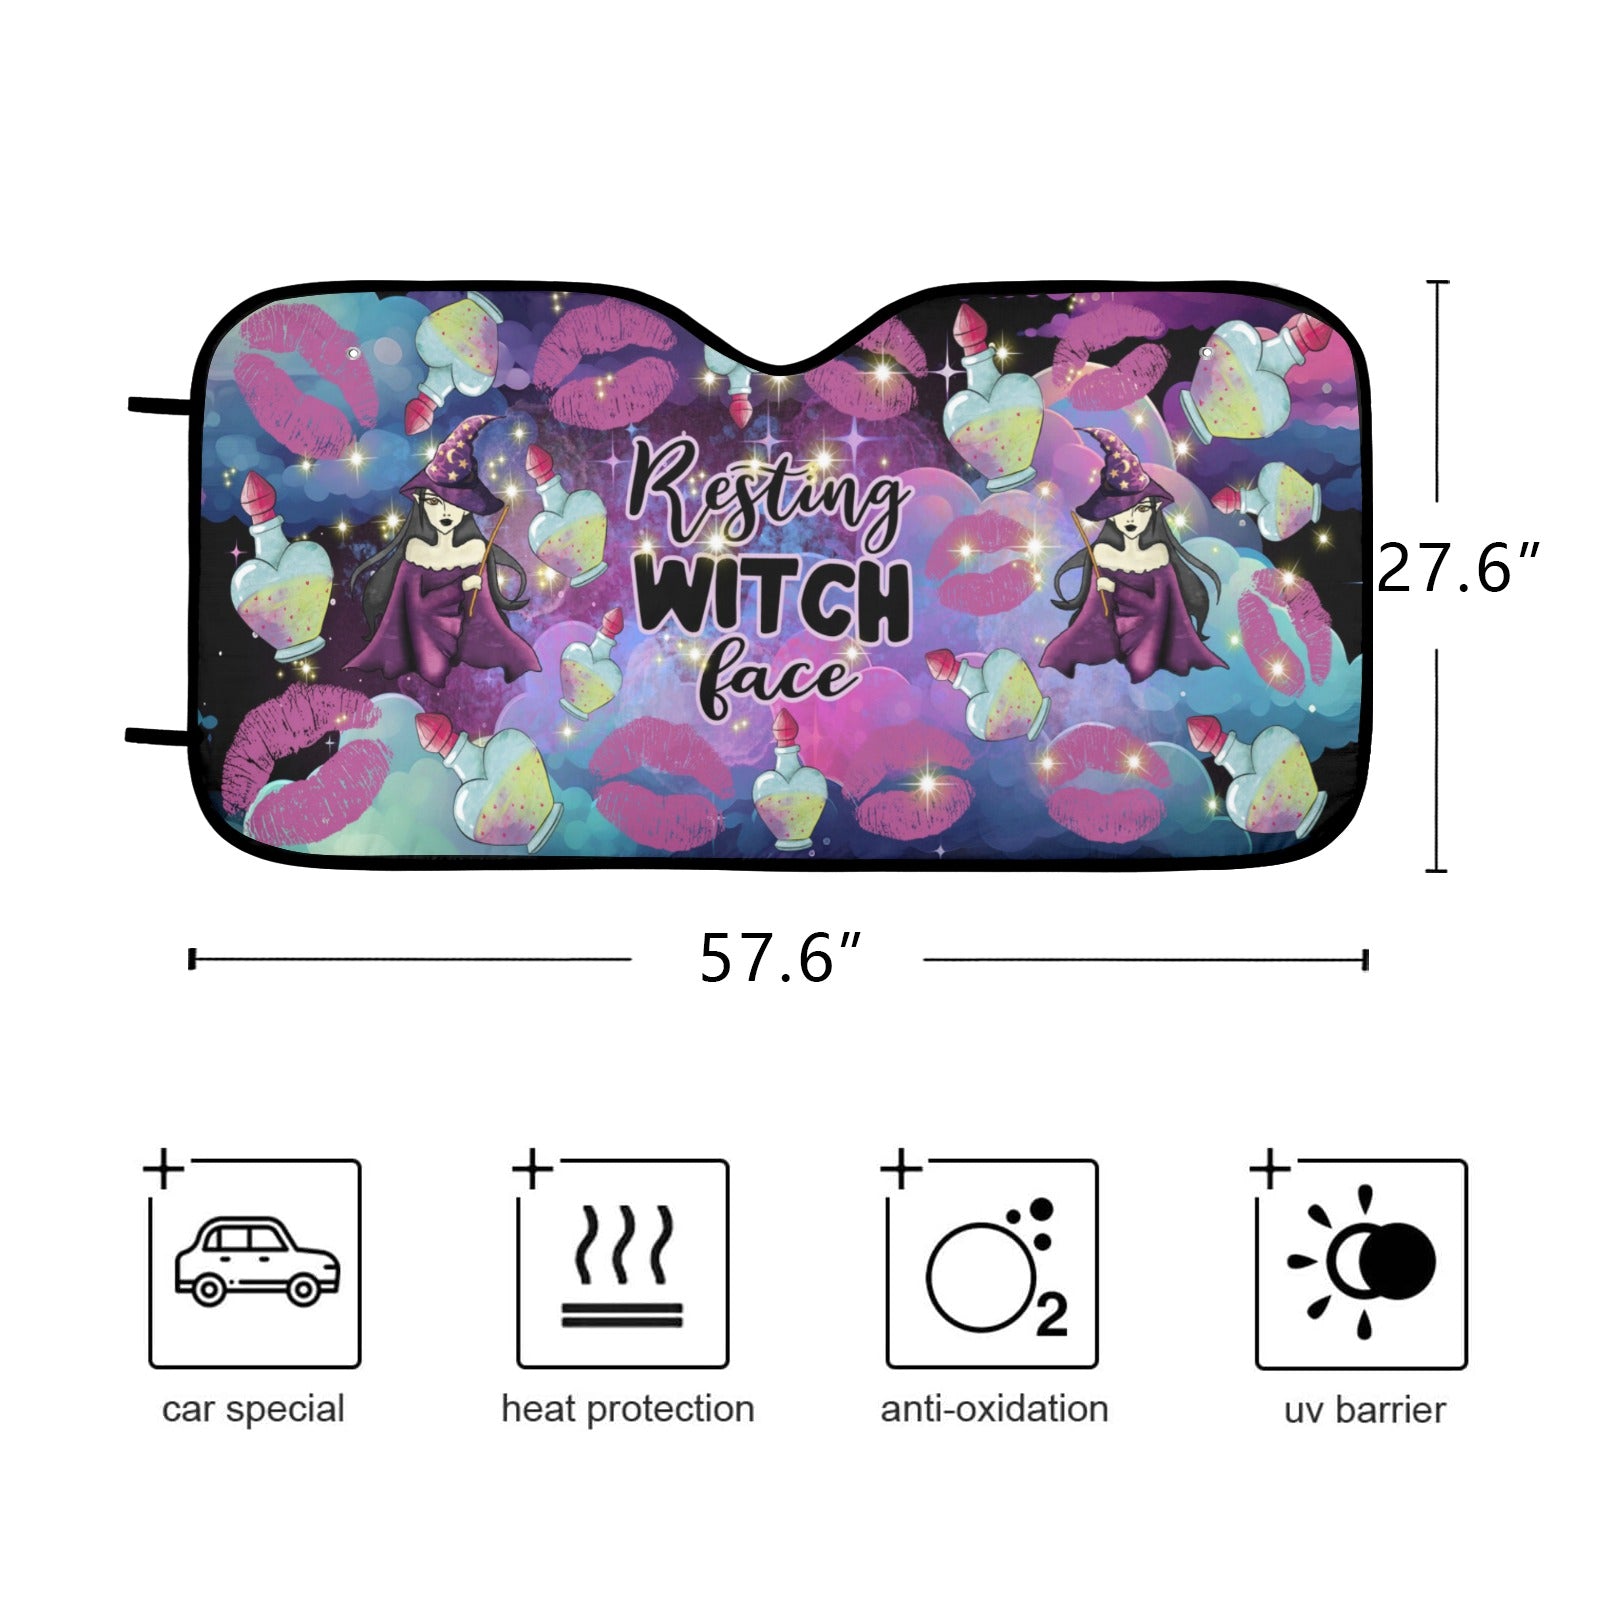 Resting witch face Car Sun Shade-MoonChildWorld